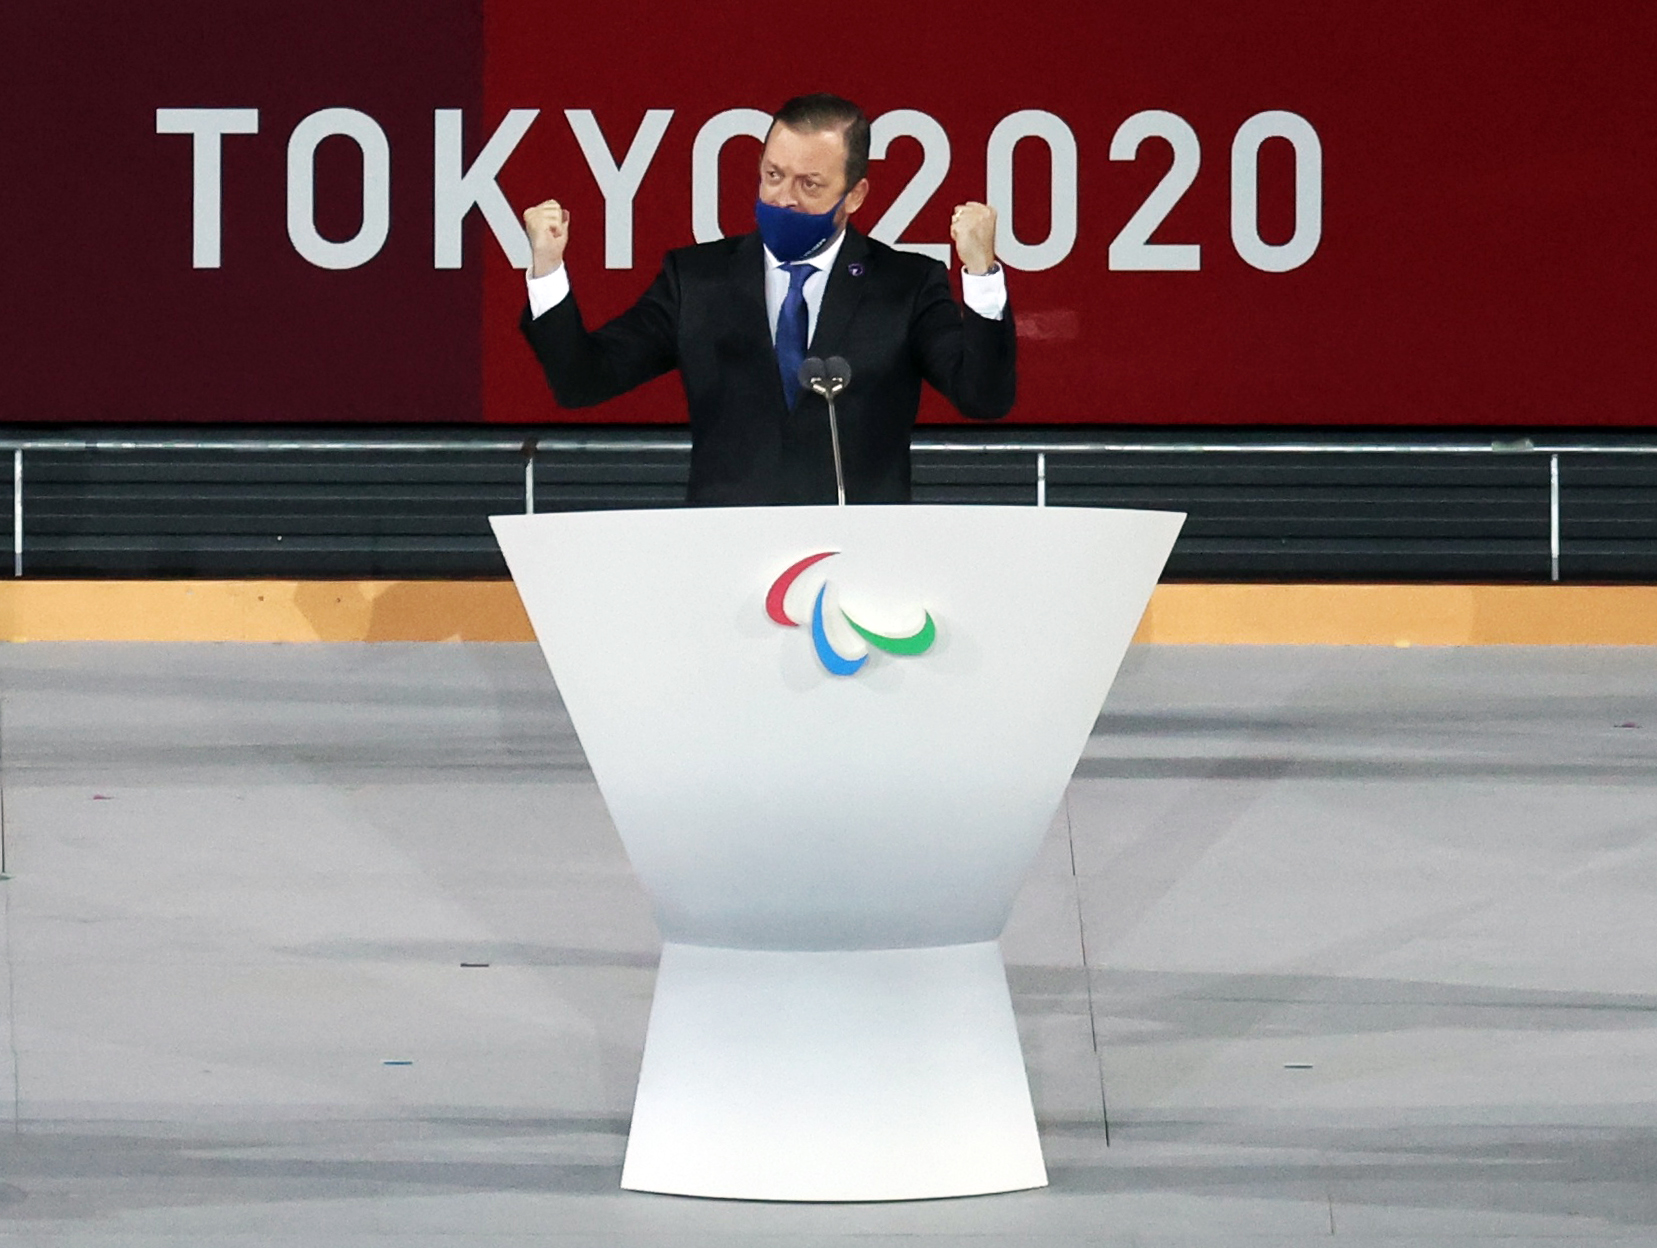 Tokyo 2020 Paralympic Games - The Tokyo 2020 Paralympic Games Closing Ceremony - Olympic Stadium, Tokyo, Japan - September 5, 2021. International Paralympic Committee President Andrew Parsons speaks during closing ceremony. REUTERS/Kim Kyung-Hoon